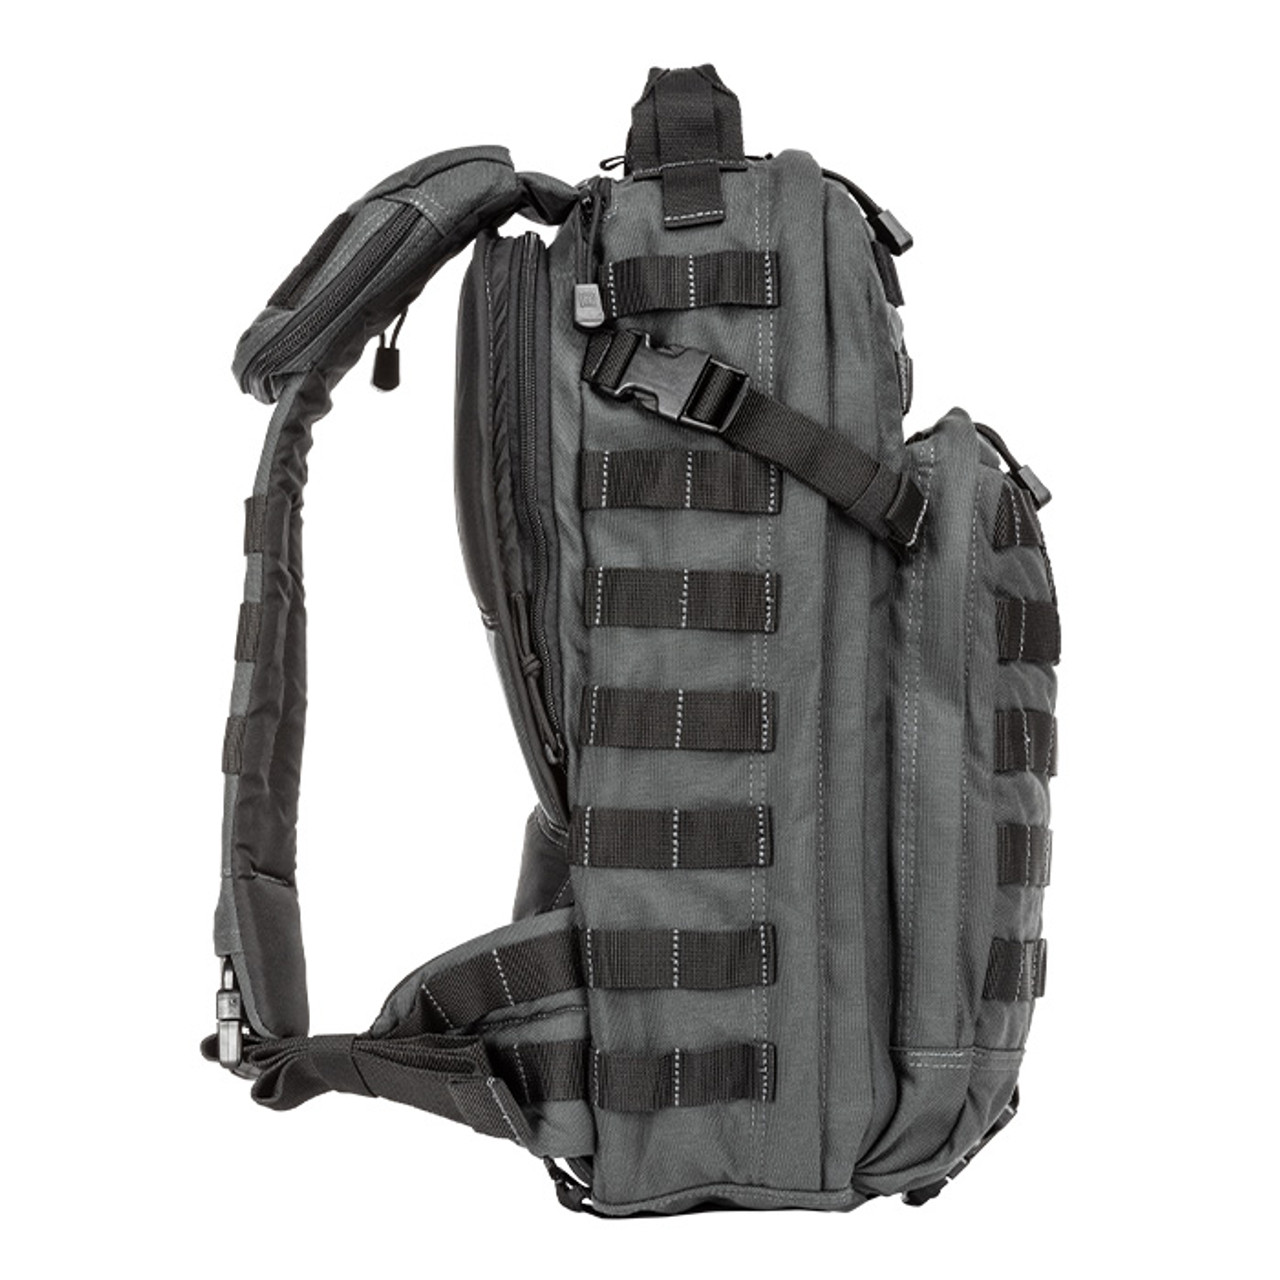 5.11 Rush Moab 6 Backpack - Double Tap